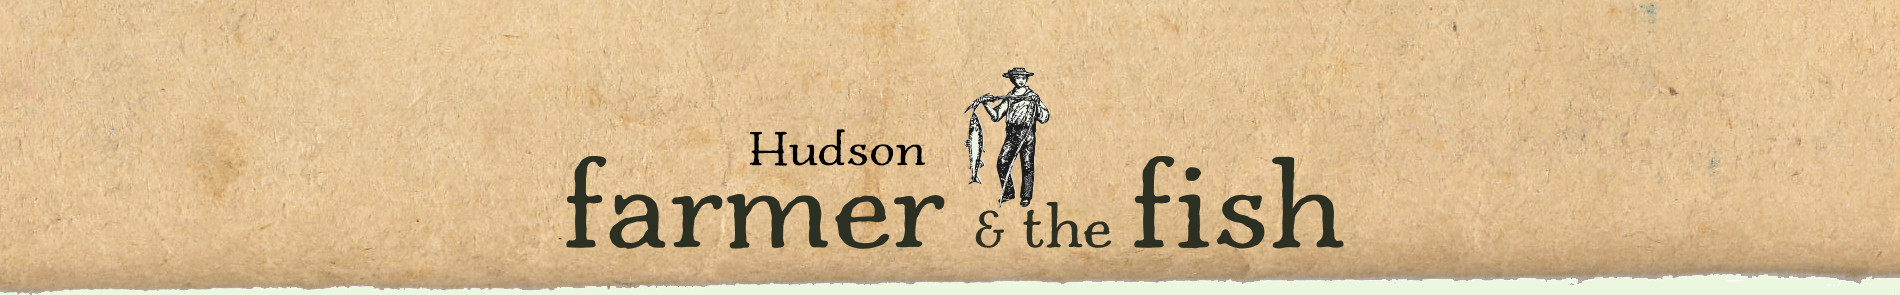 Farmer and the Fish logo on antique paper background